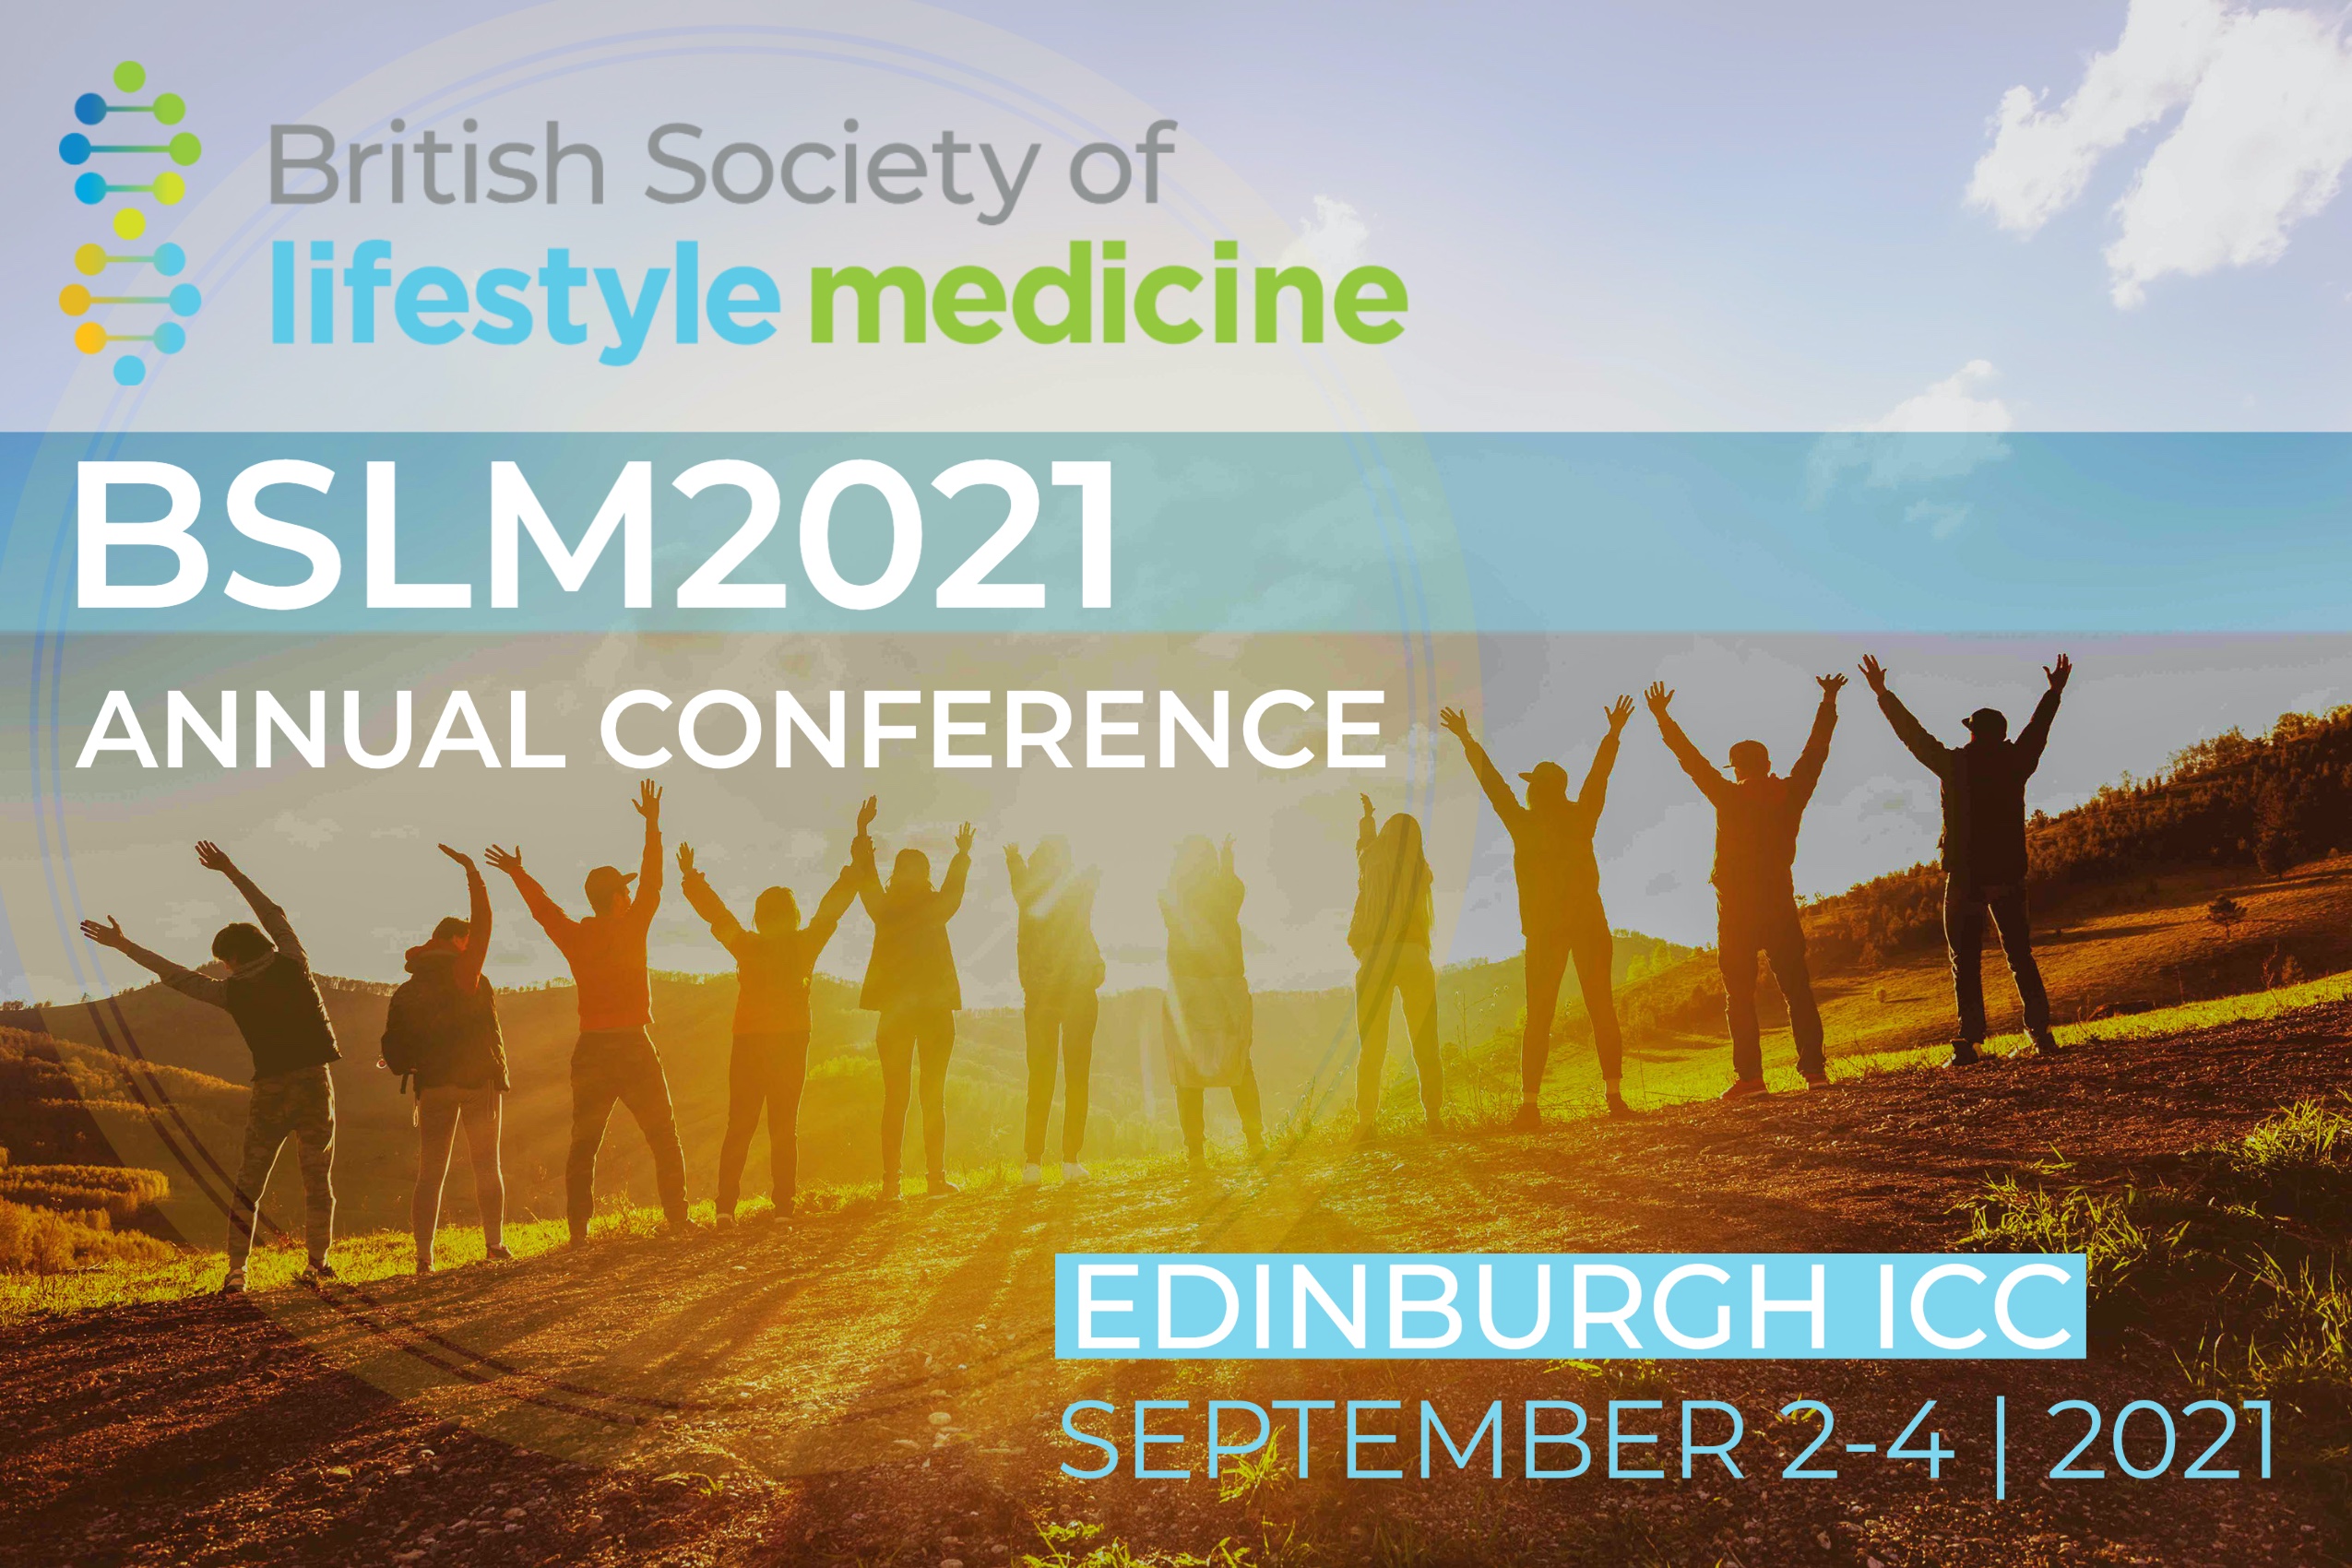 BSLM 2021 Annual Conference British Society of Lifestyle Medicine